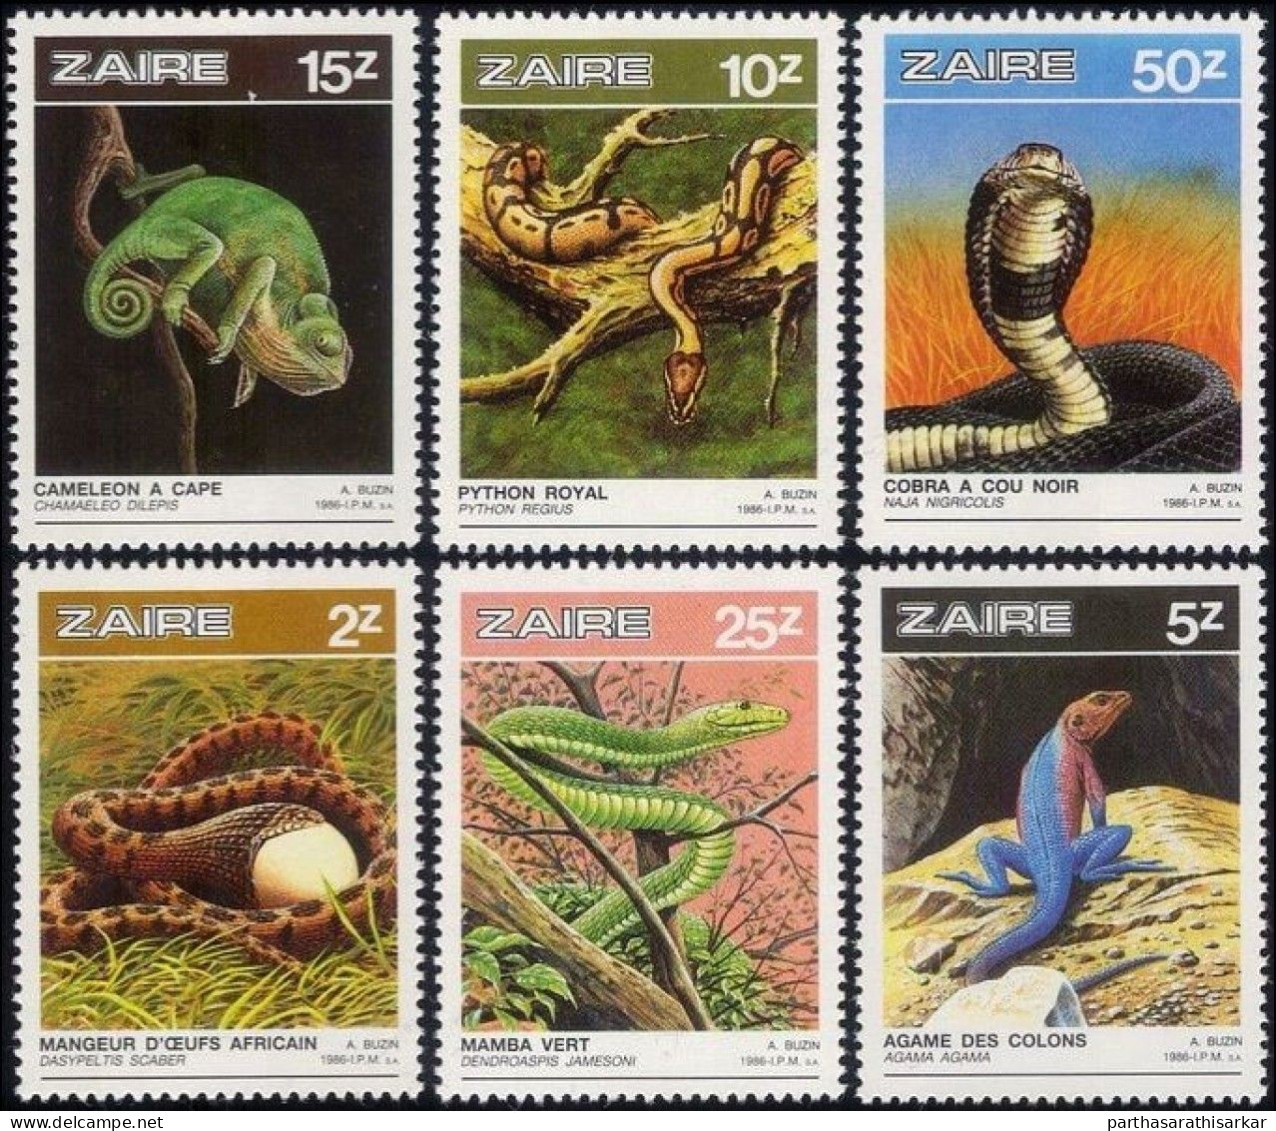 ZAIRE 1986 REPTILES SNAKES LIZARDS NATURE WILDLIFE COMPLETE SET MNH - Serpenti